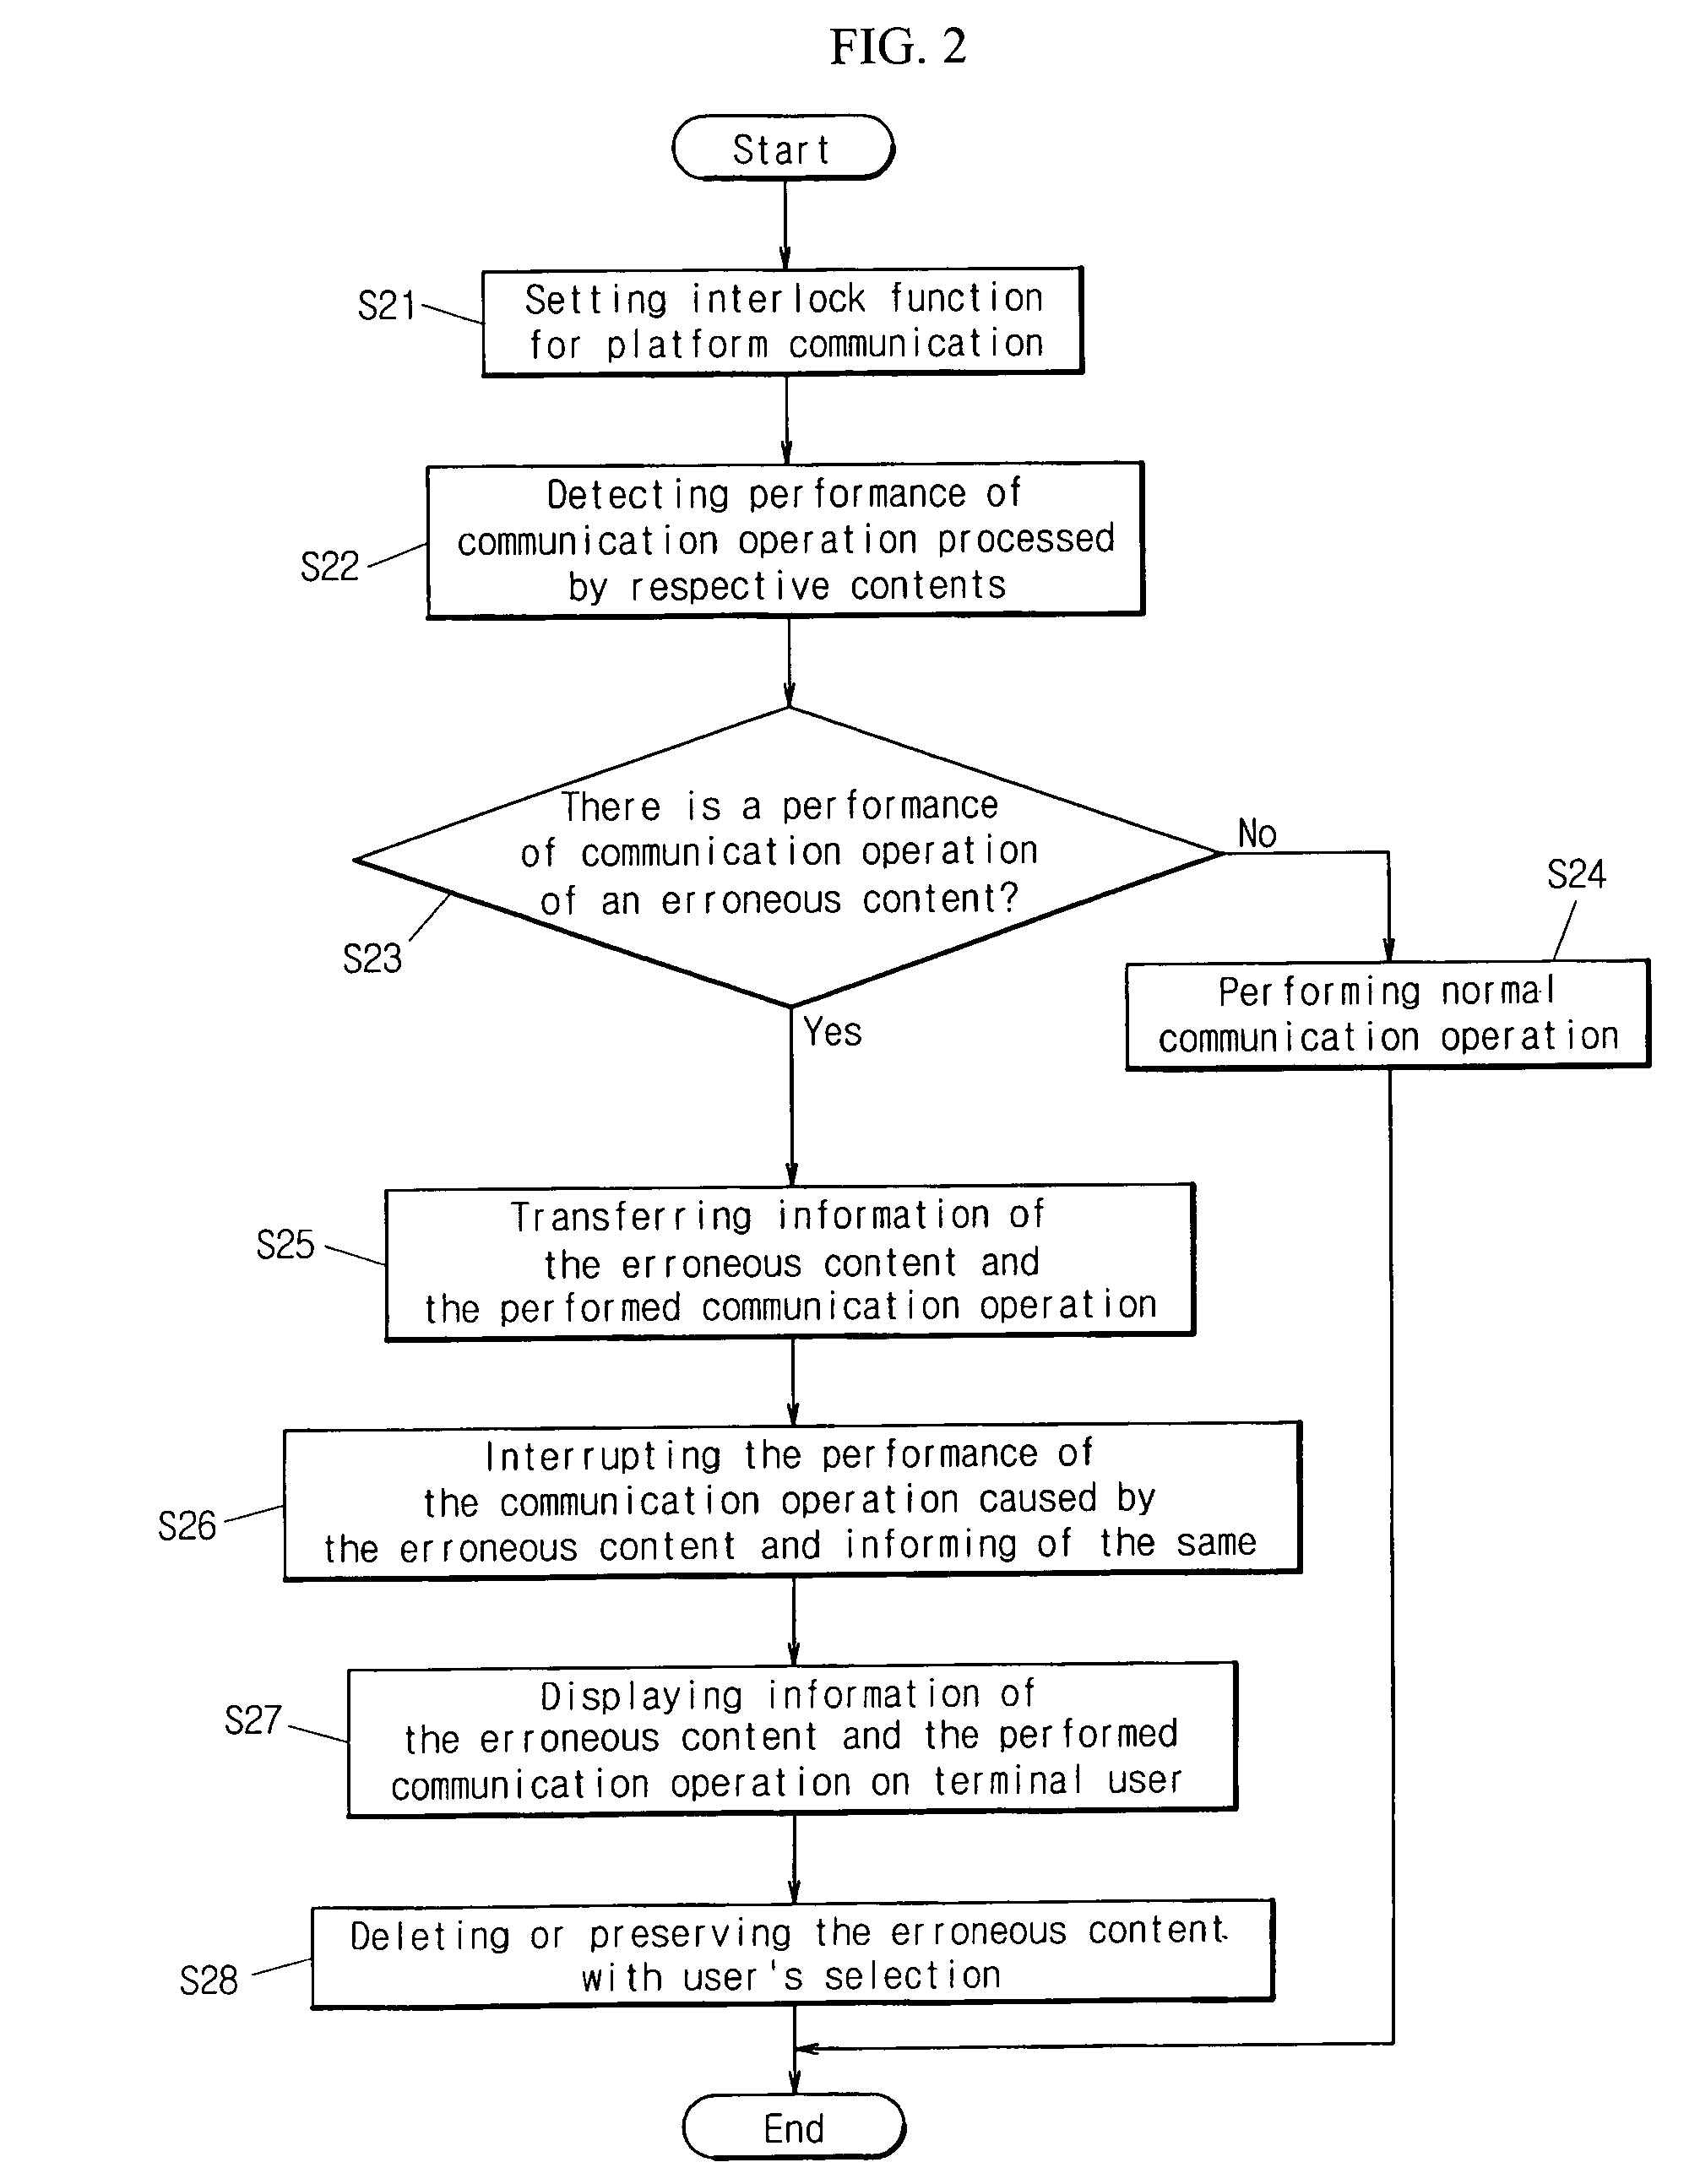 Apparatus and method for detecting communication operation resulted from an erroneous content in mobile platform